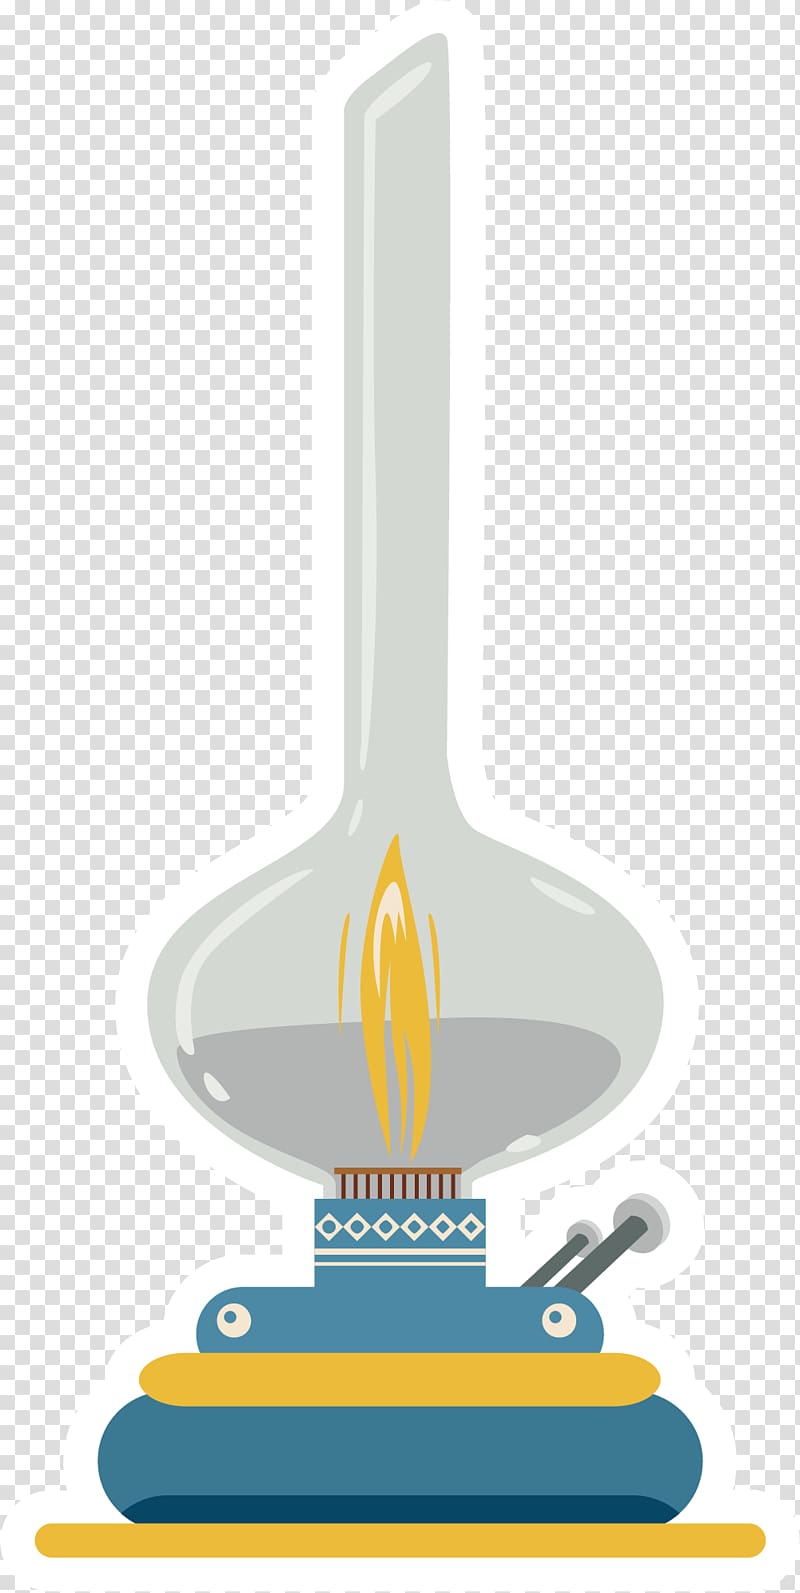 Candlestick Oil lamp, Simple oil lamp for Eid UL Fitr transparent background PNG clipart